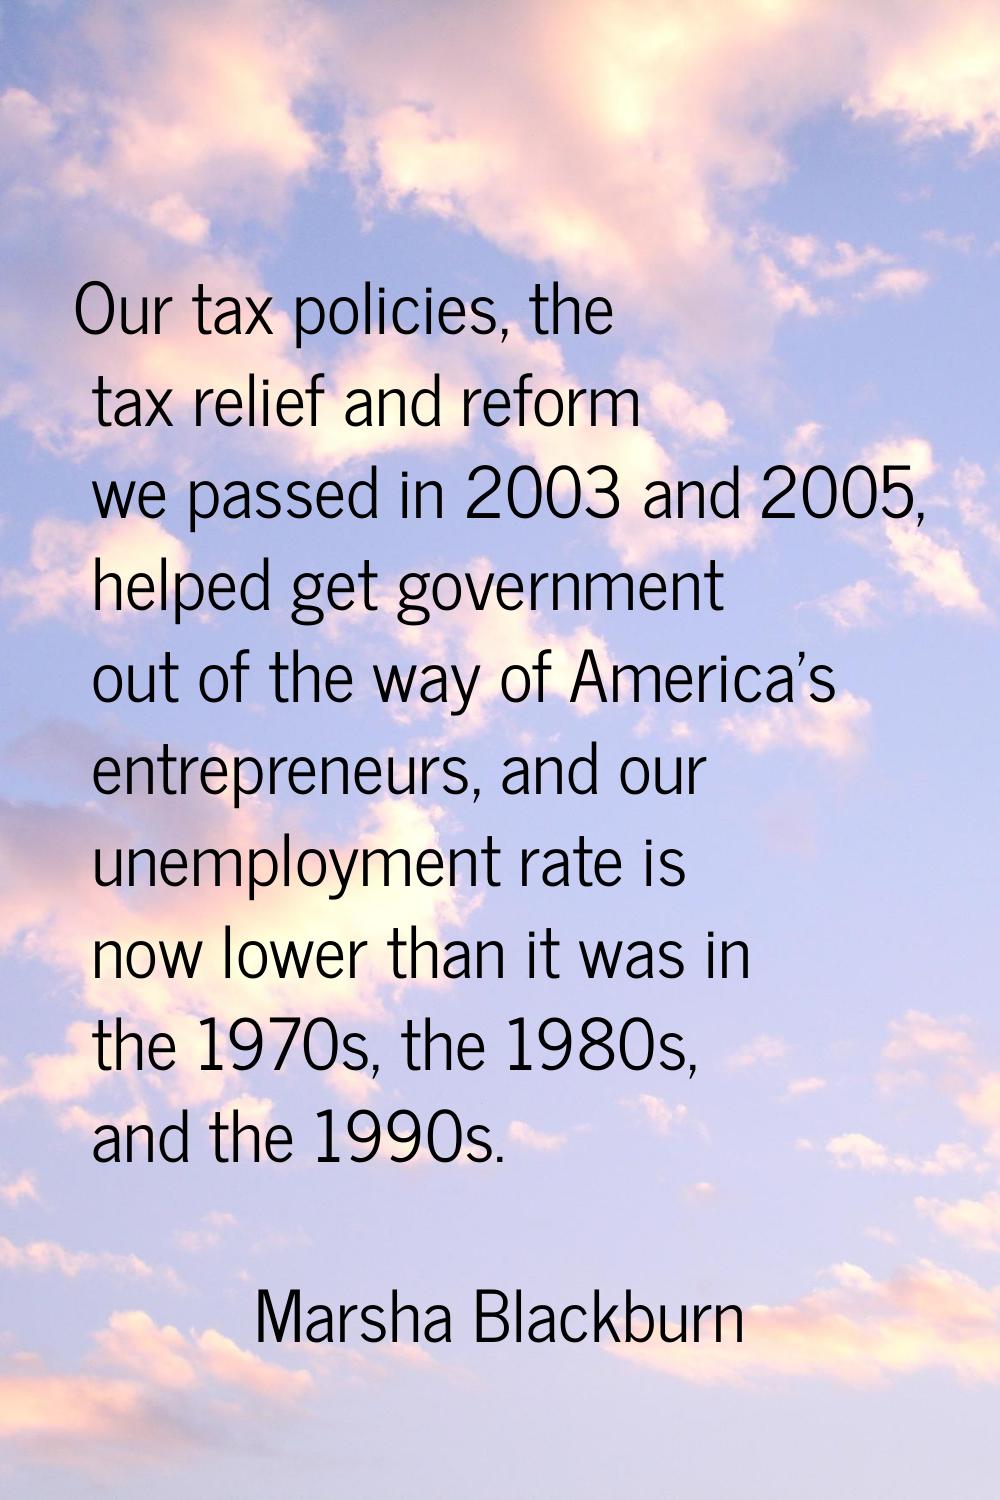 Our tax policies, the tax relief and reform we passed in 2003 and 2005, helped get government out o